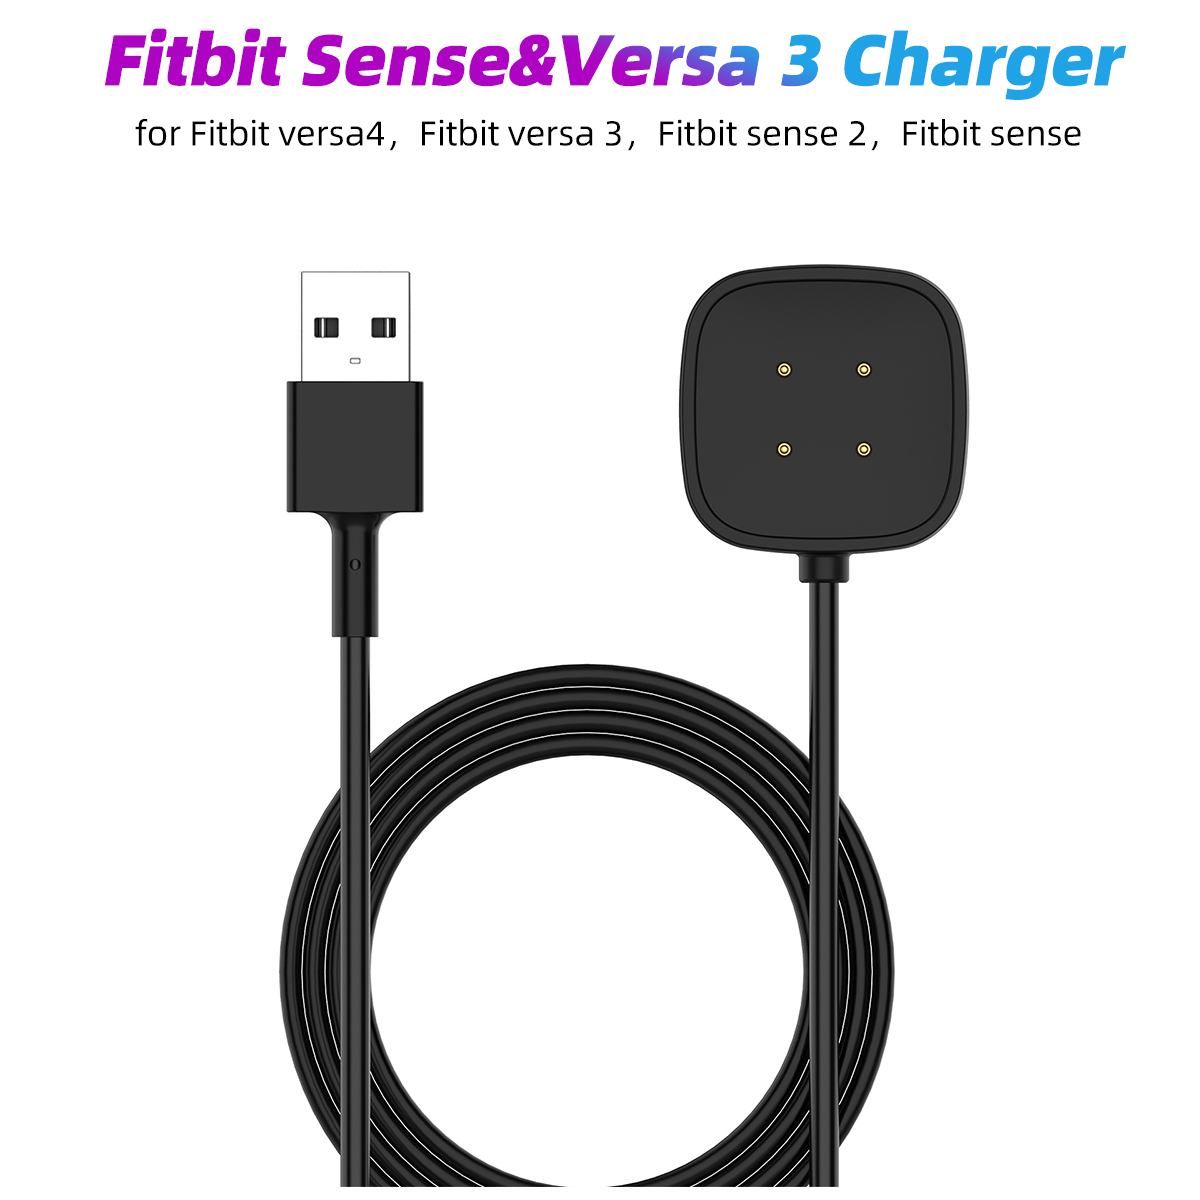 Fonken USB Fast Charger Cable Charging Dock Stand Cradle for Fitbit Versa 4 3 Smart Watch Accessories for Fitbit Sense 4 2